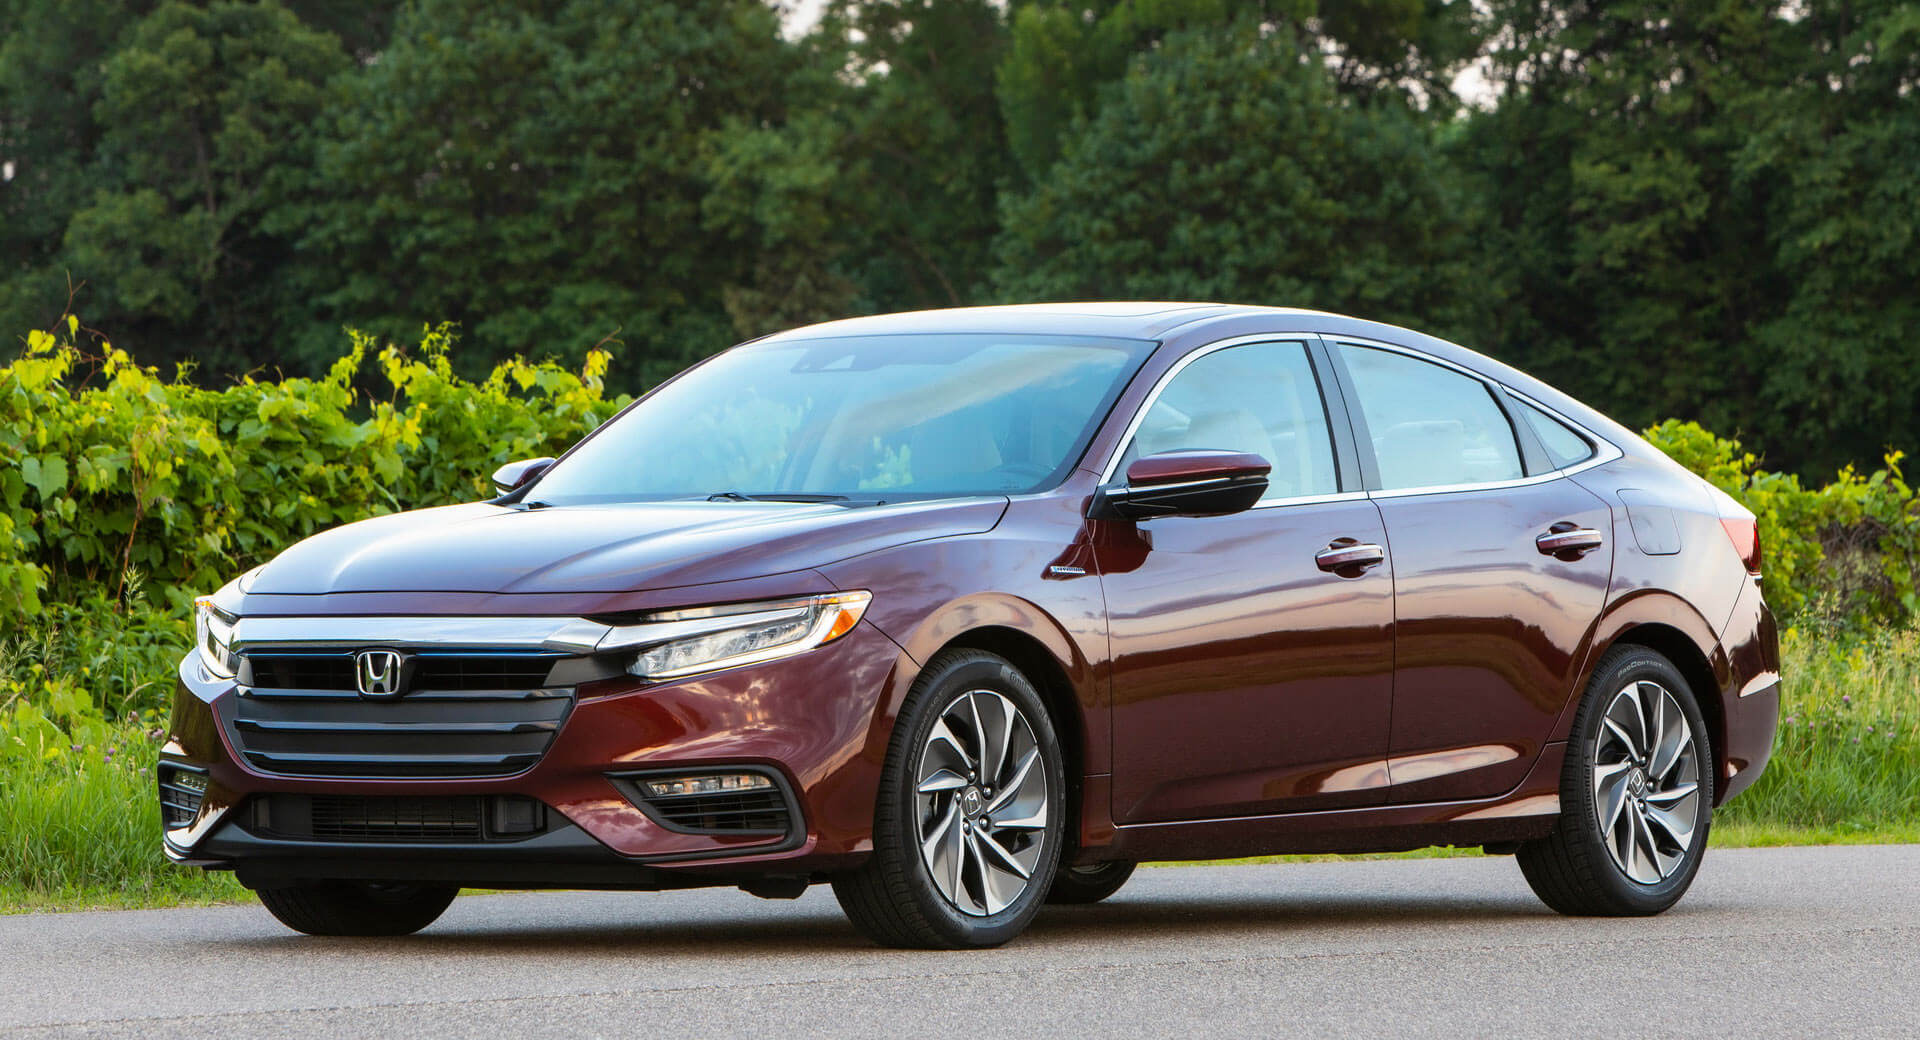 2020 Honda Insight Priced From $22,930, Gets More Standard Safety Kit |  Carscoops